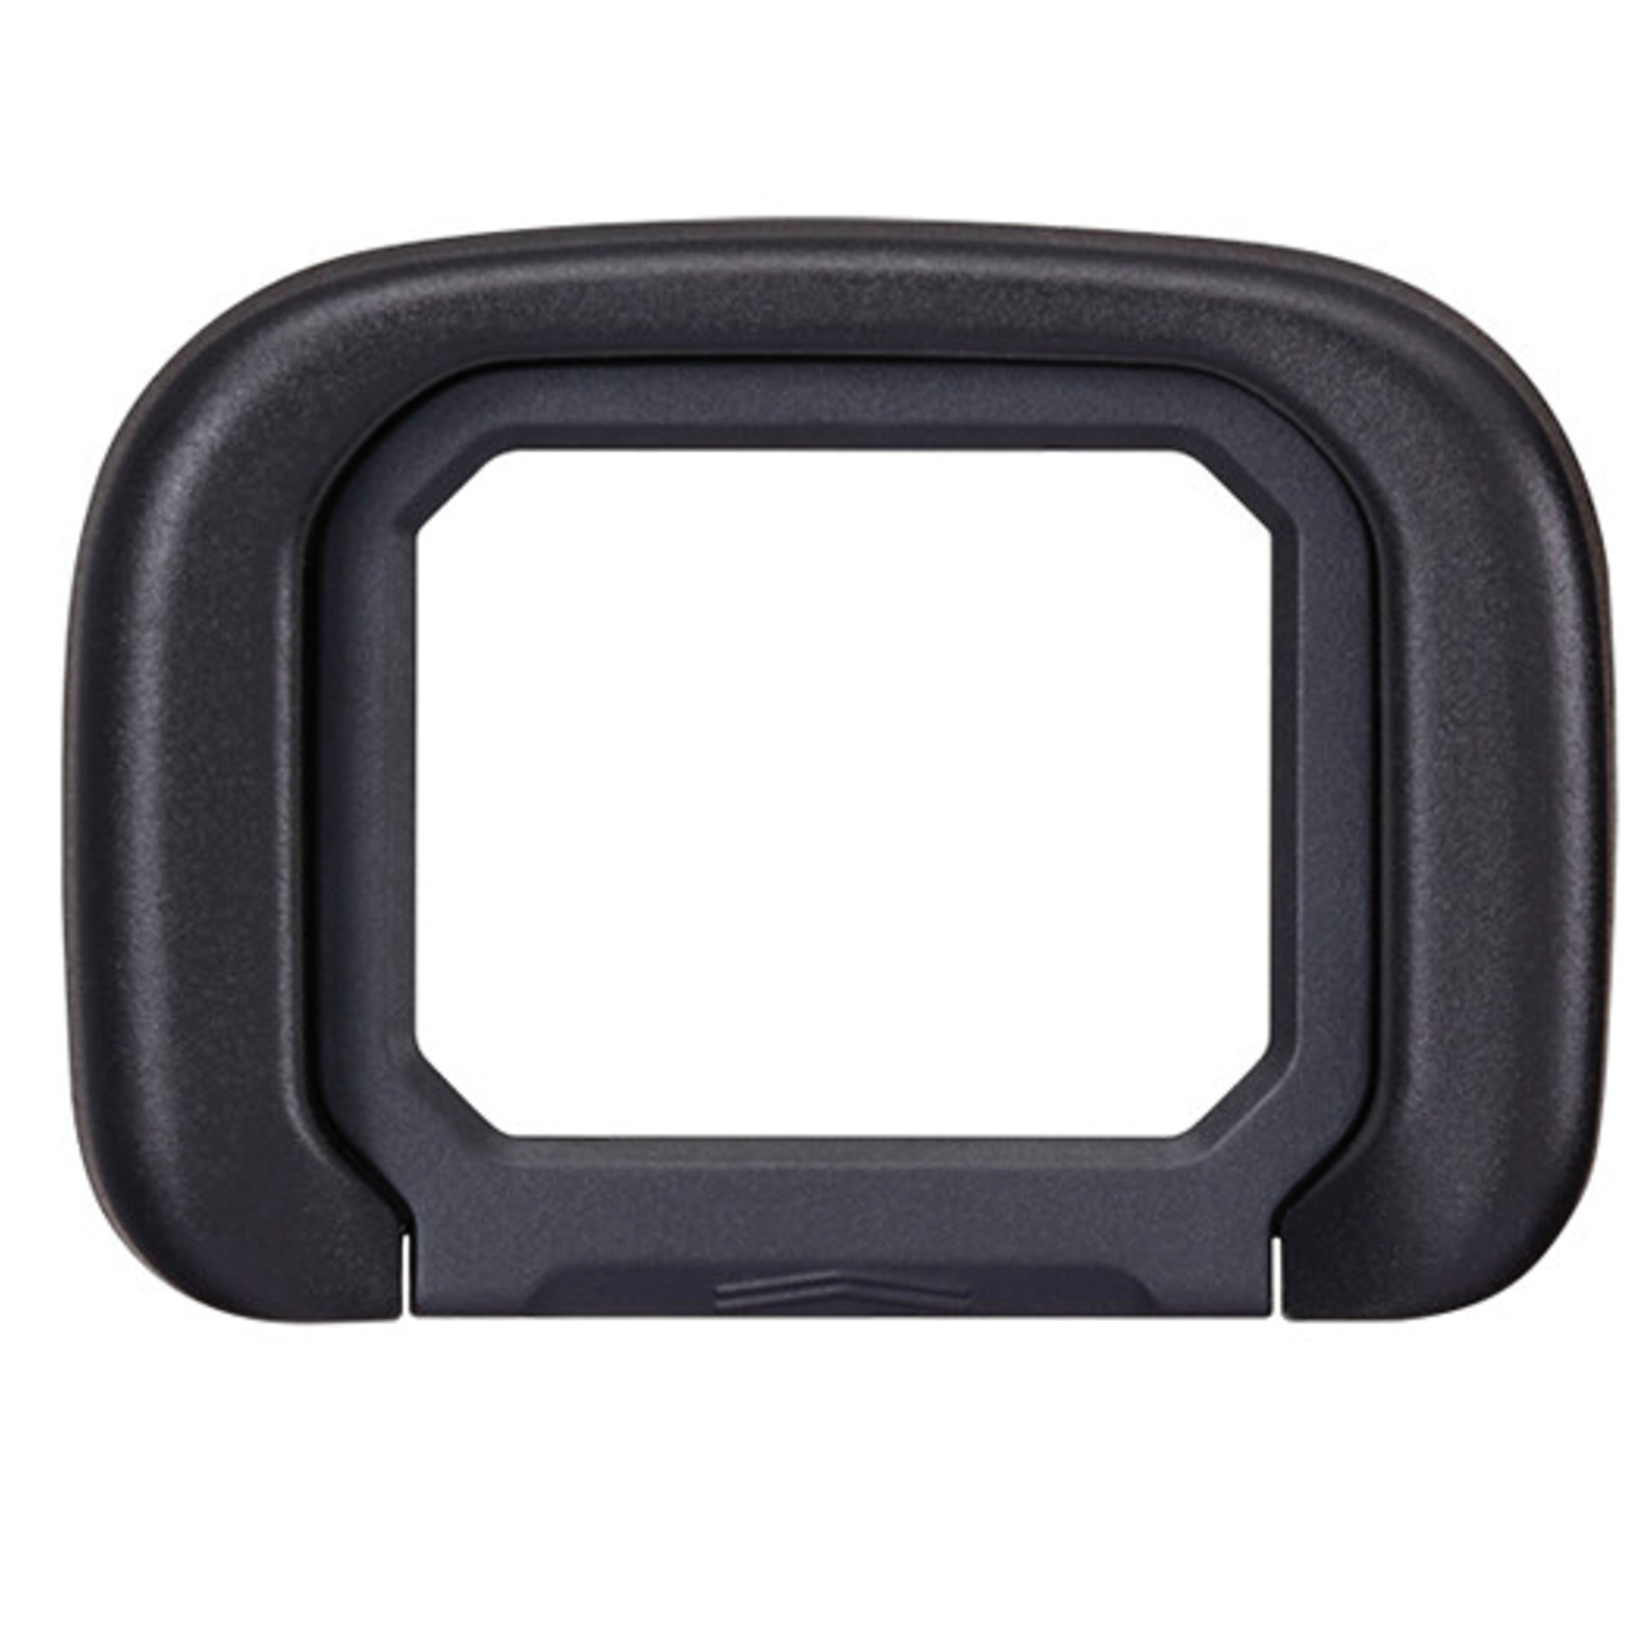 Canon Canon ER-h Eyecup for R3